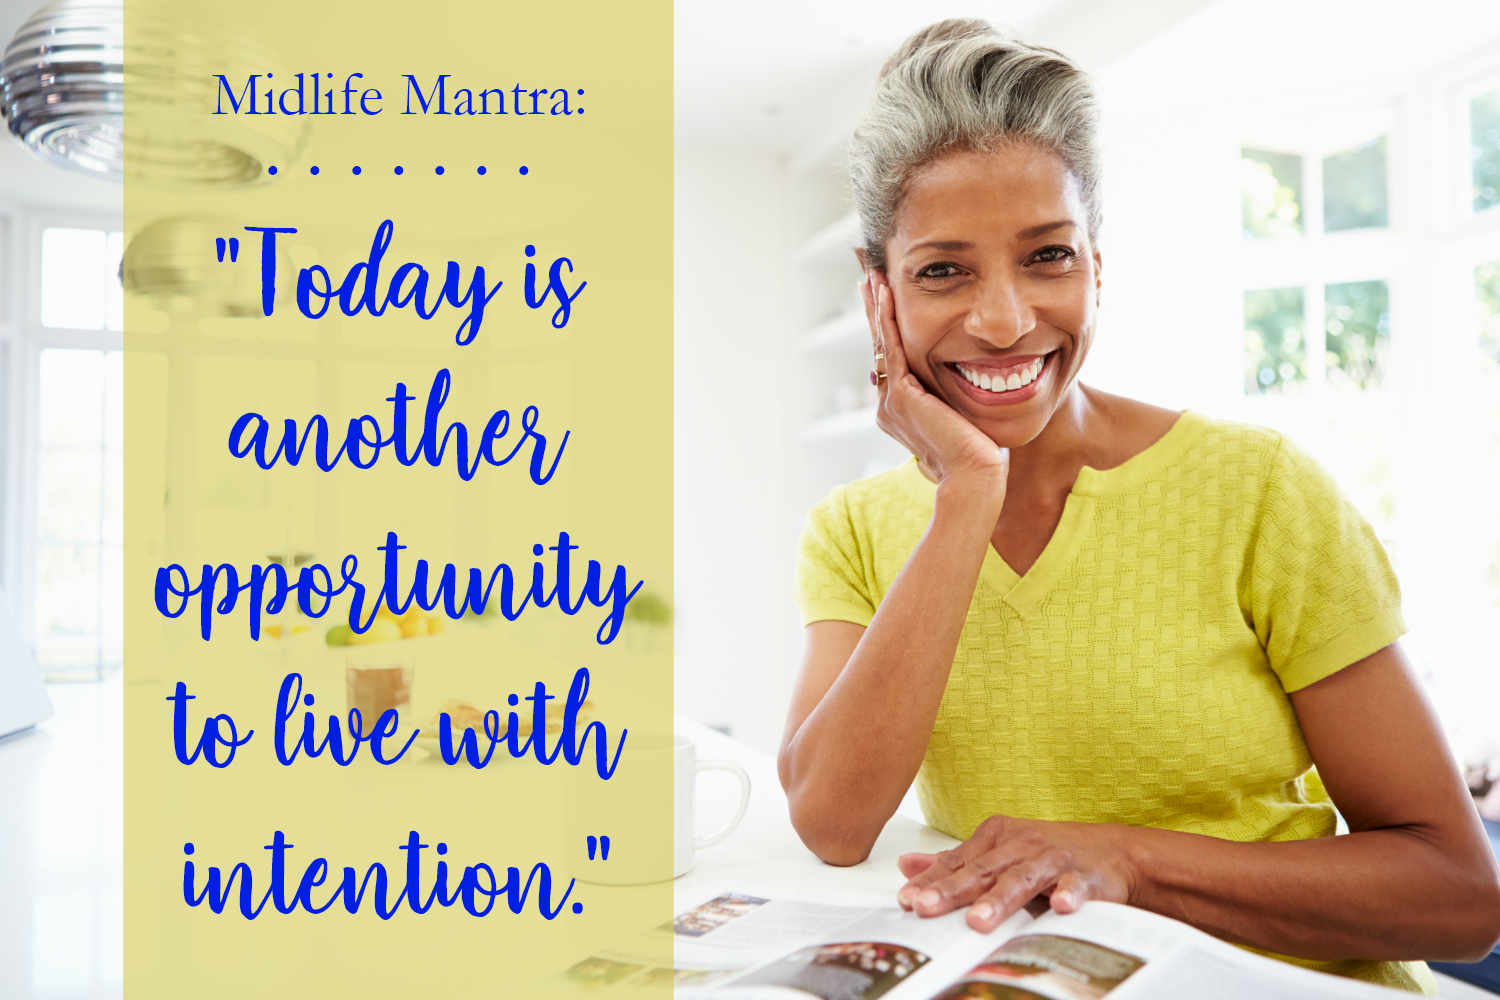 Midlife Mantra: Live With Intention